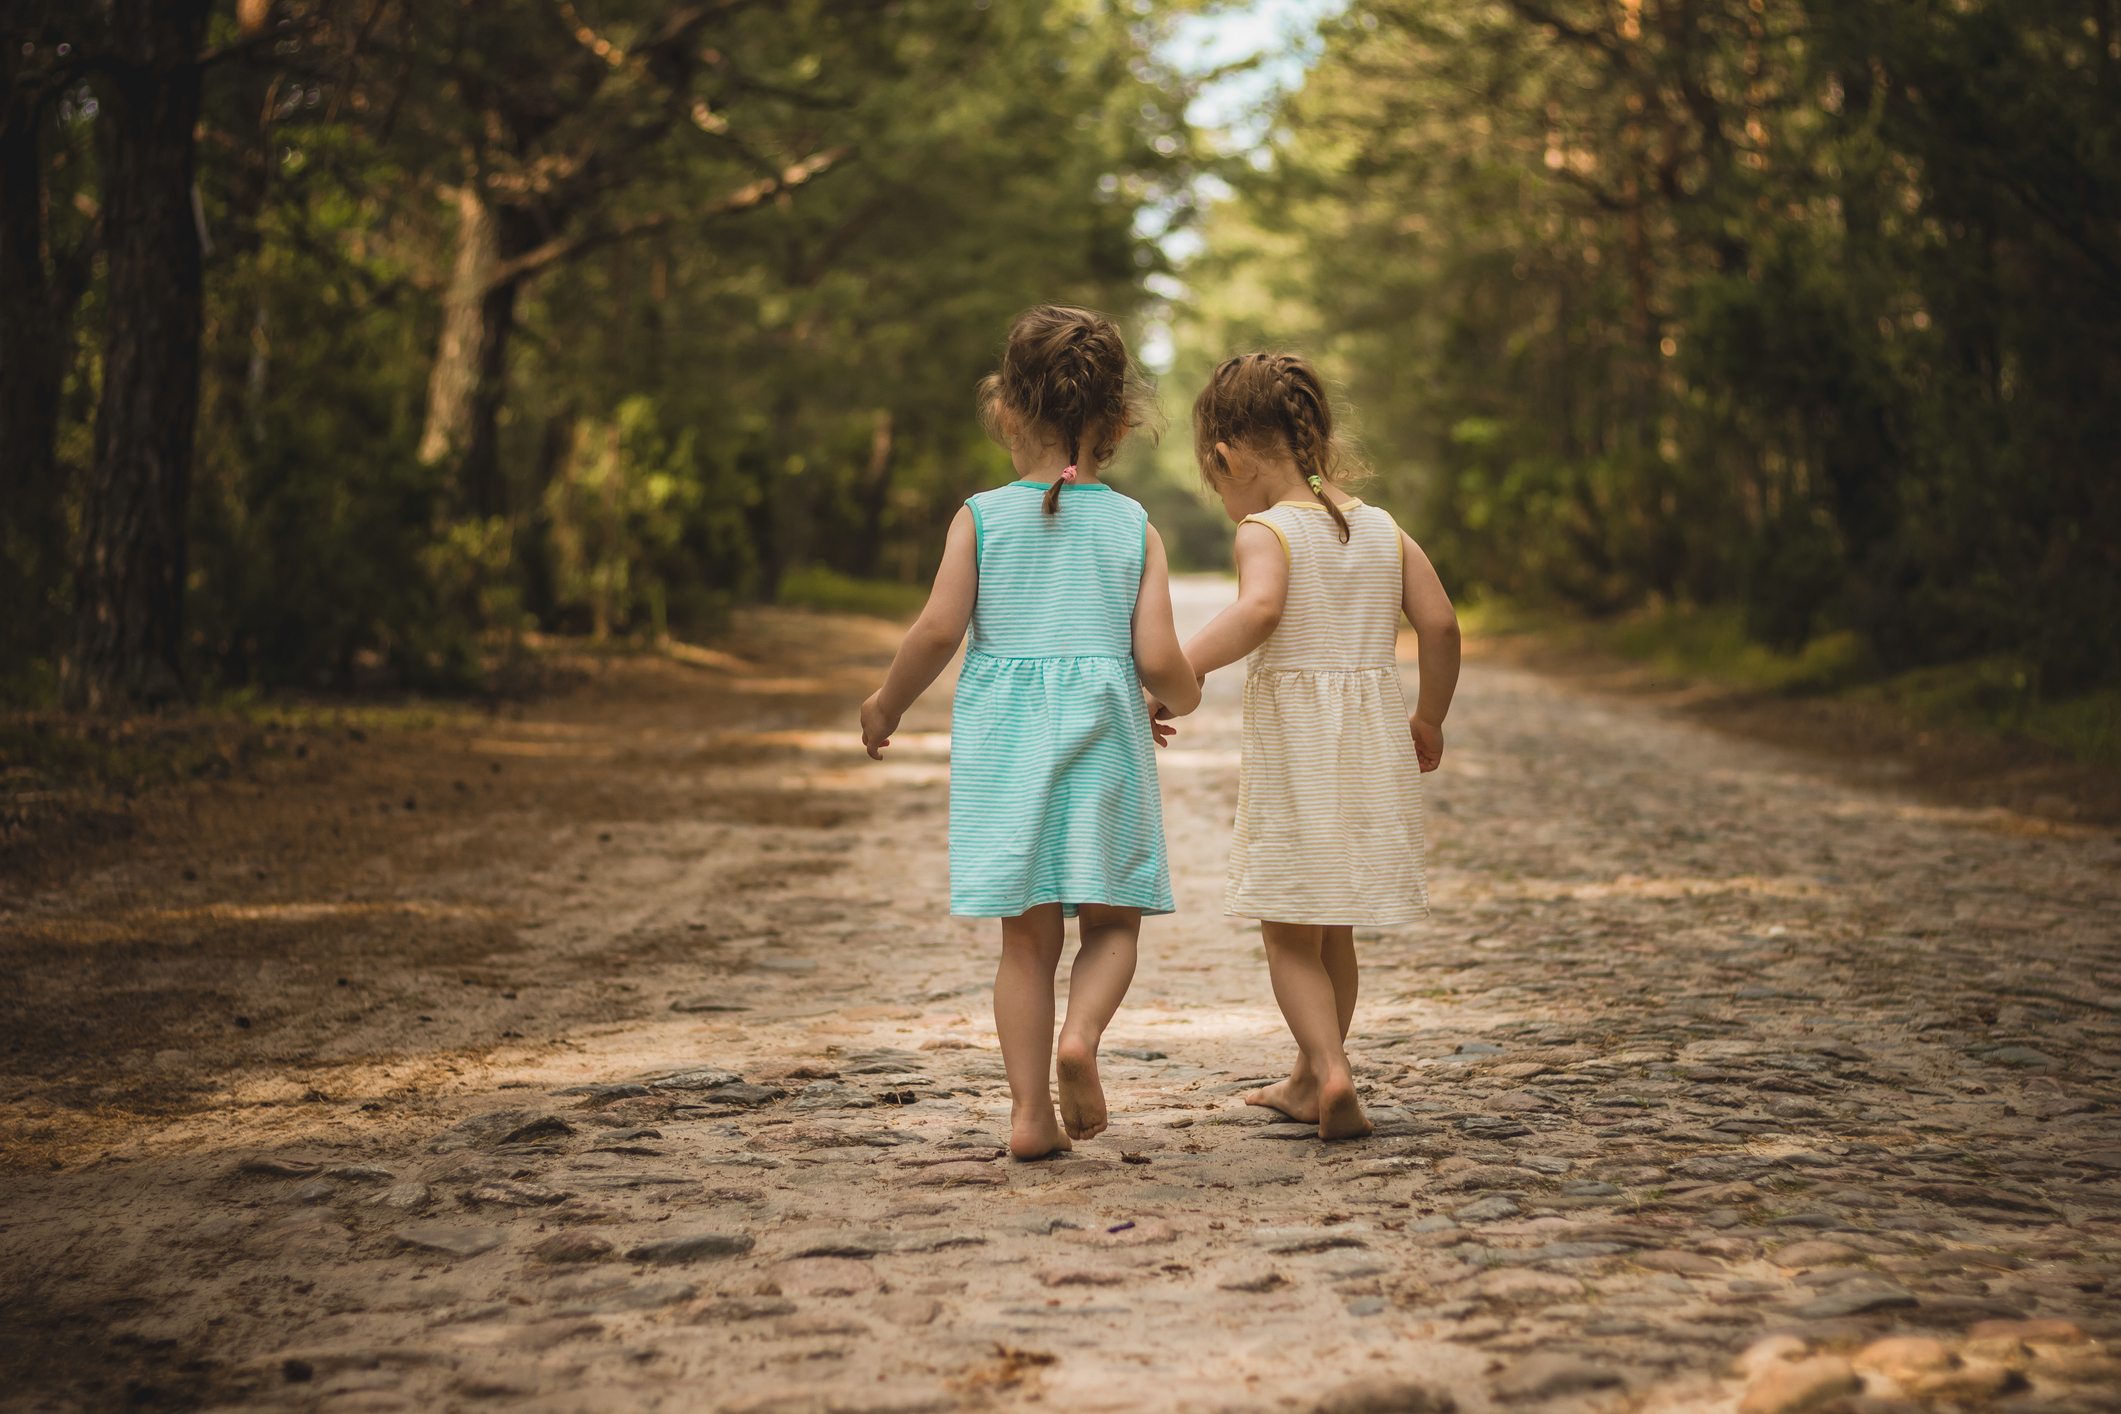 Two young children holding hands and walking on a forest path